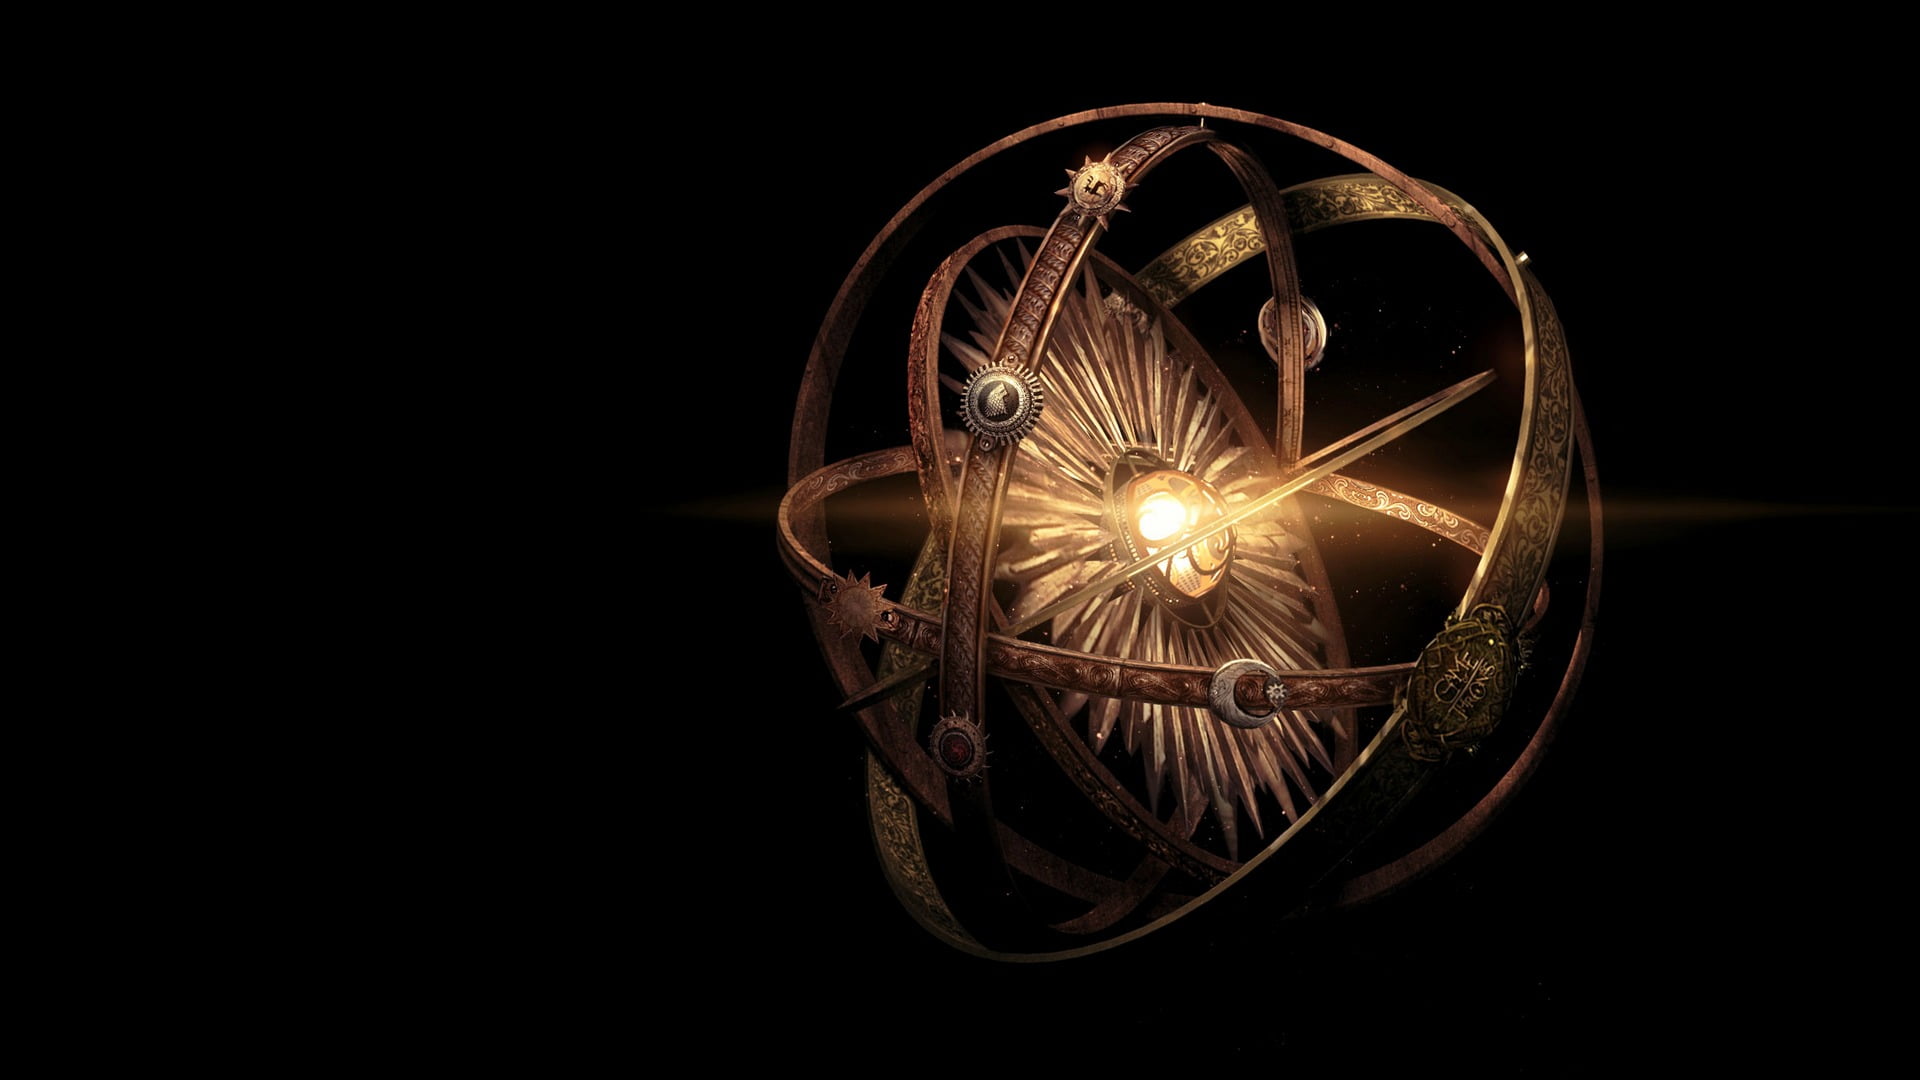 Armillary sphere digital wallpaper, Game of Thrones, compass